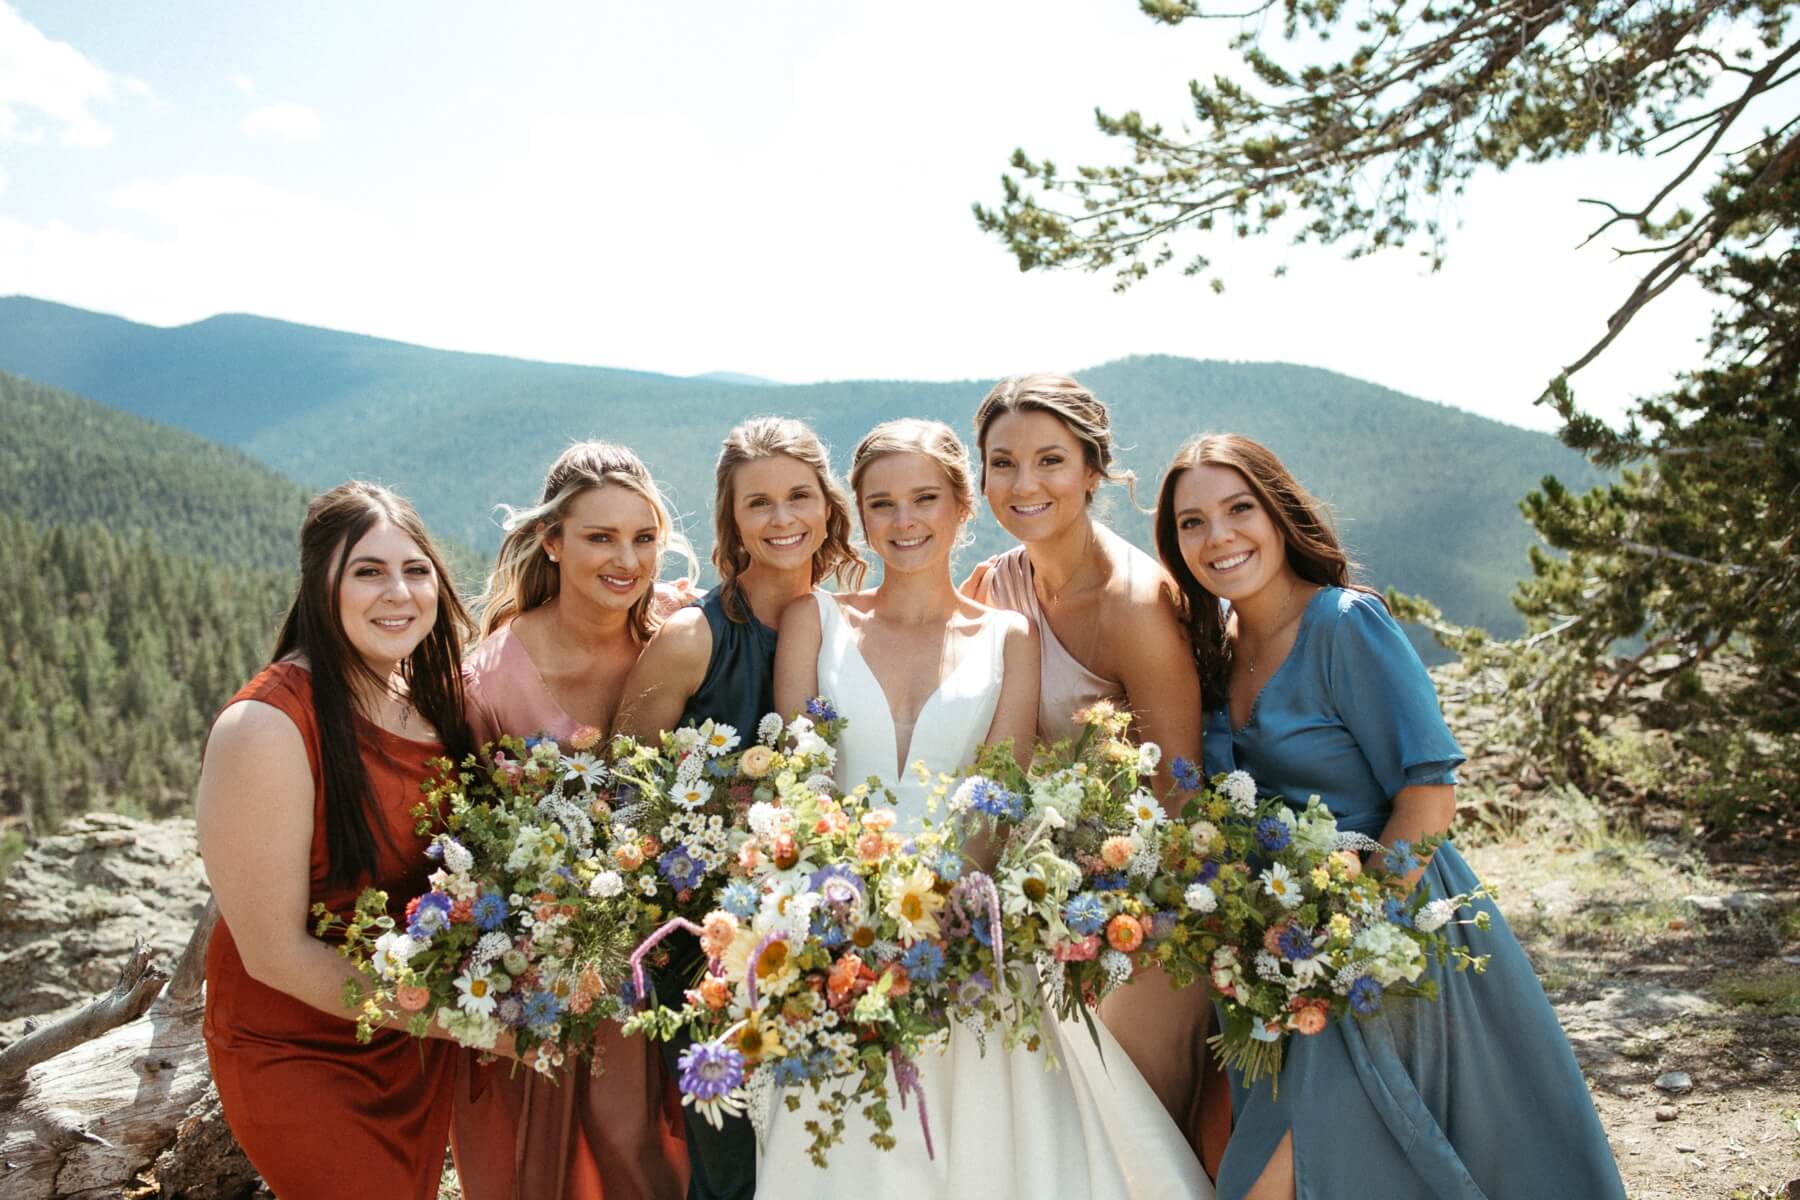 Bride with bridesmaids wearing different colored dresses and holding colorful bouquets at North Star Gatherings, a Colorado mountain wedding venue